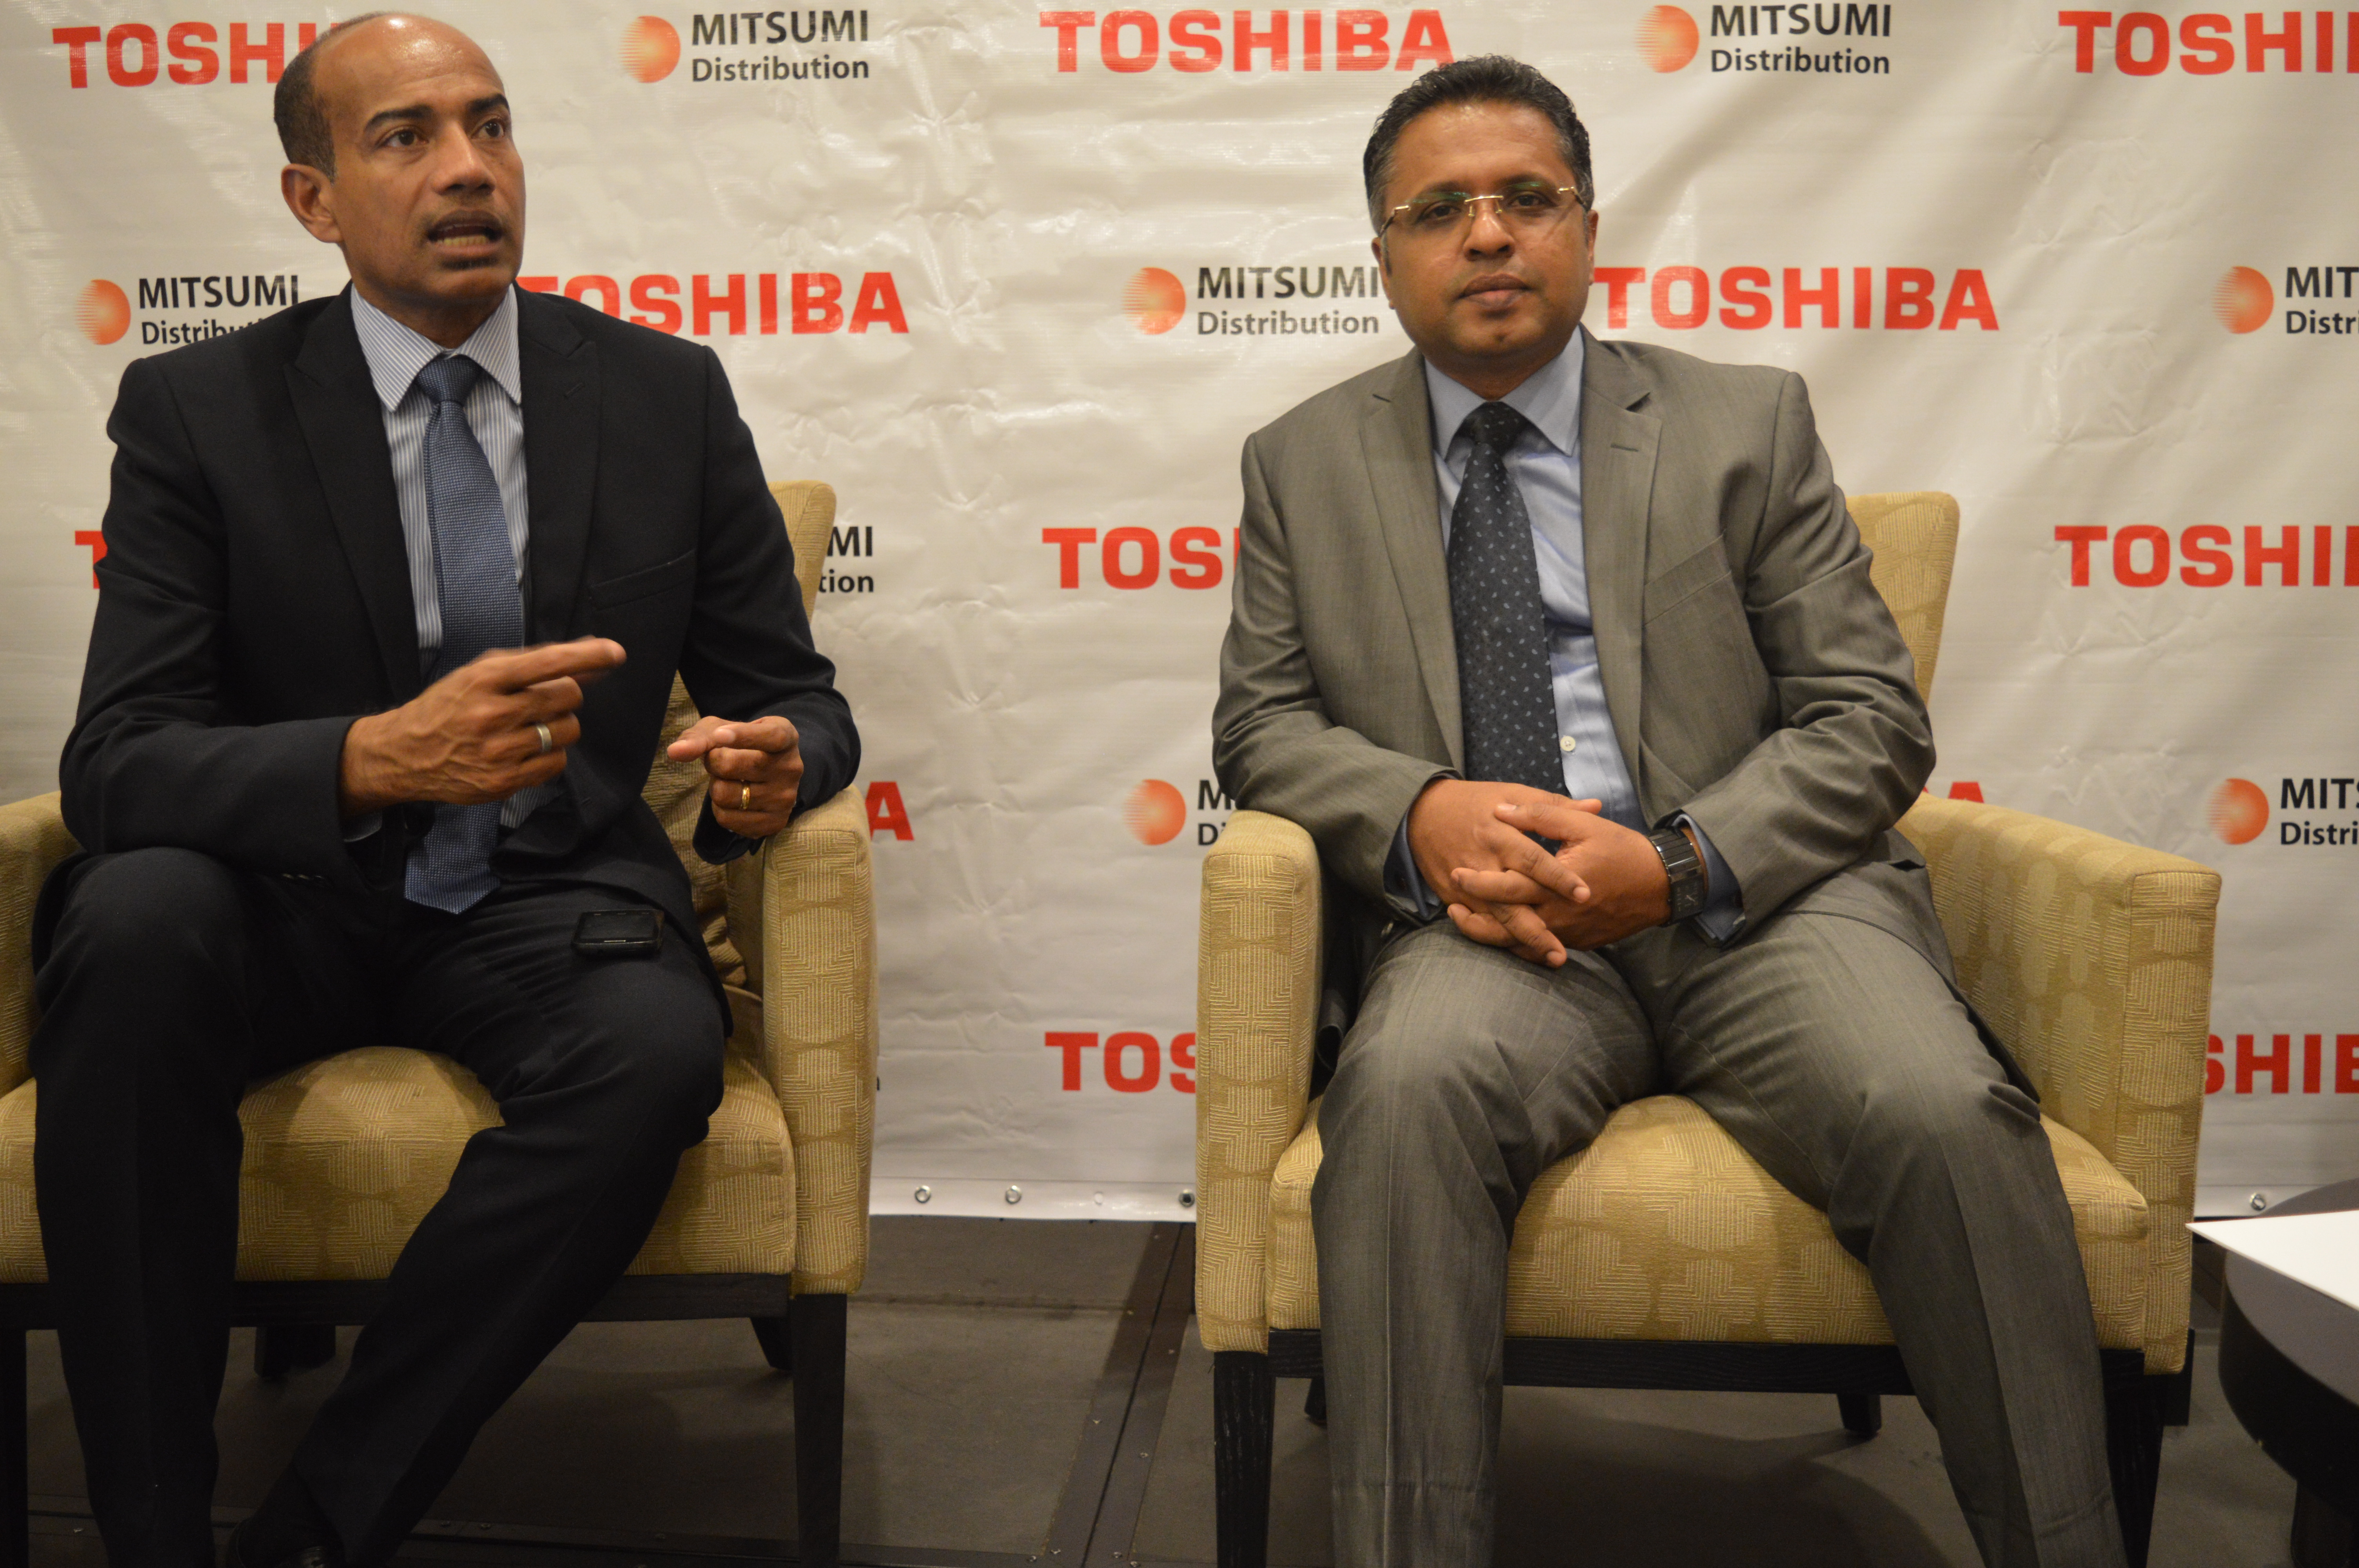 Toshiba launches new strategy ‘’Go Africa’’ to expand Storage Business in Rwanda